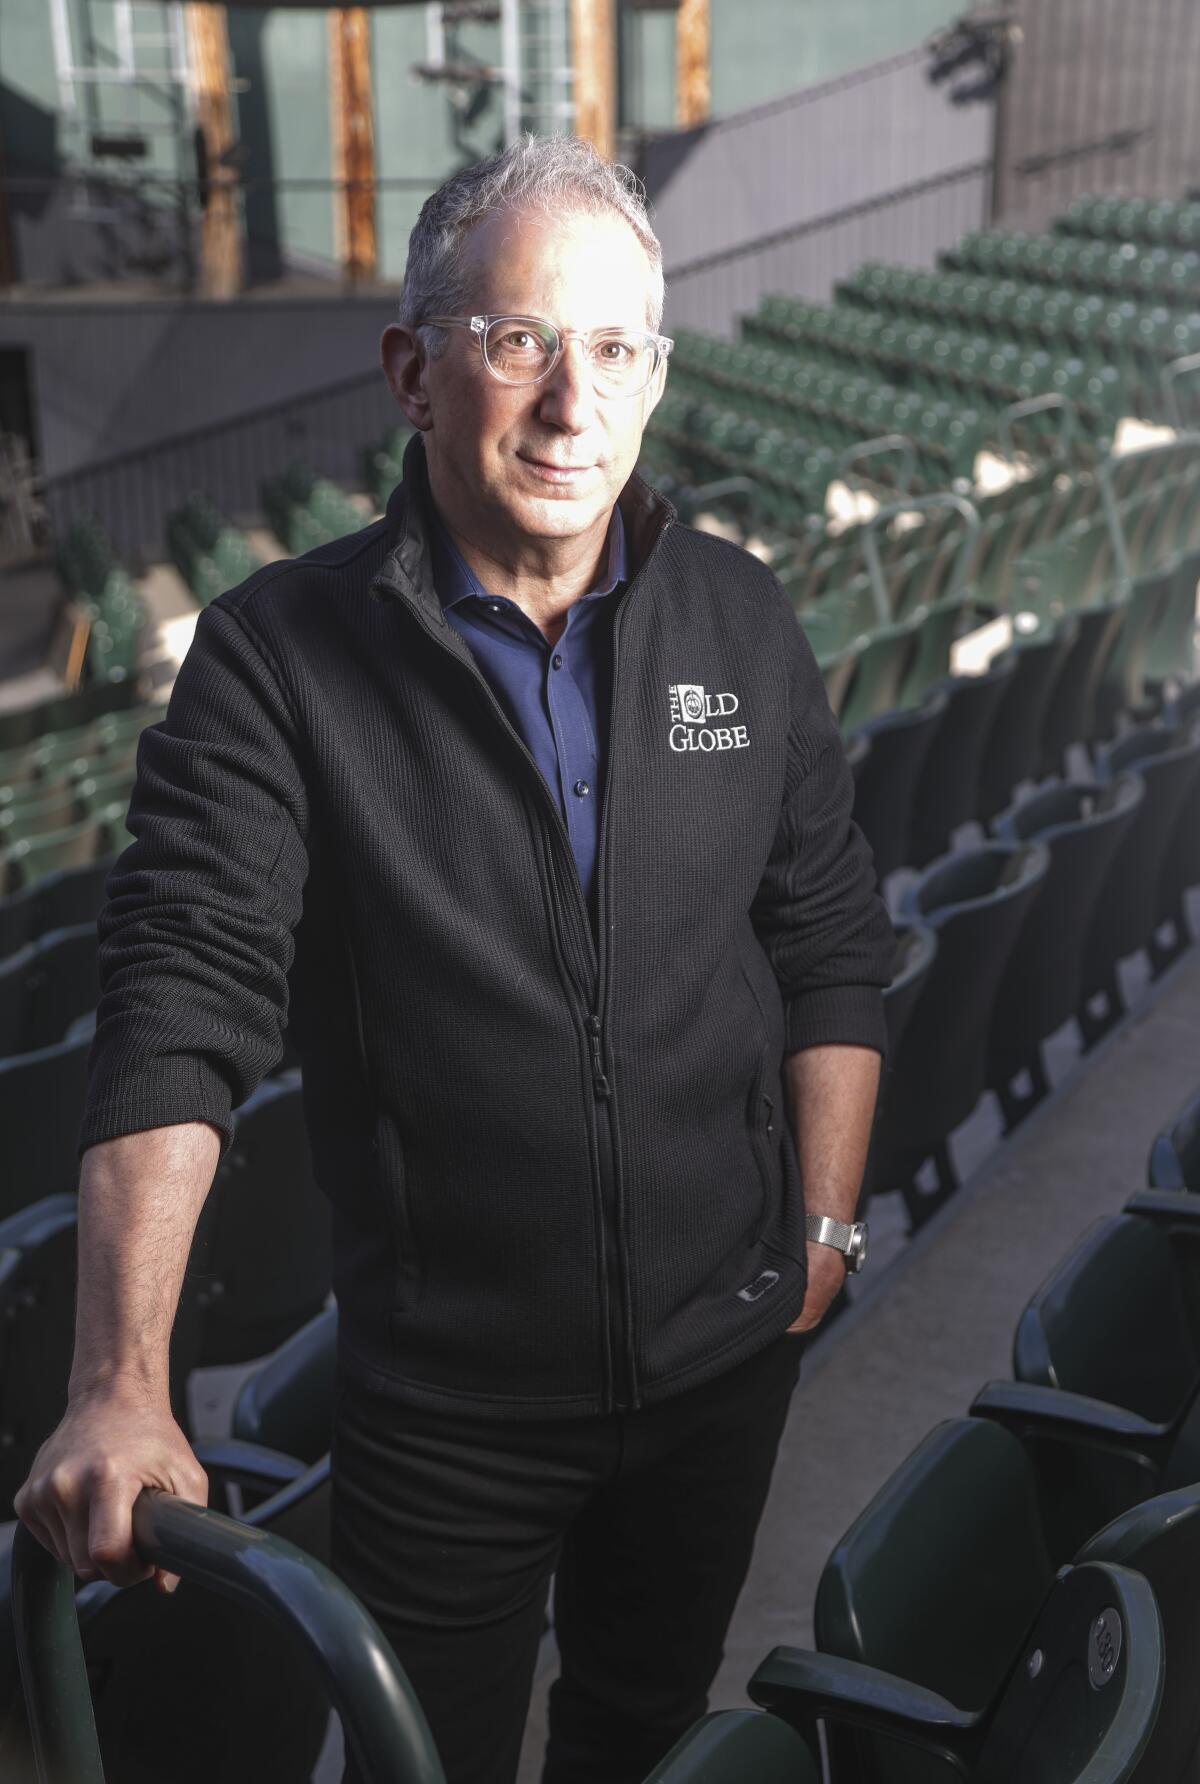 Artistic director Barry Edelstein poses in the Old Globe's Festival Theater in Balboa Park.